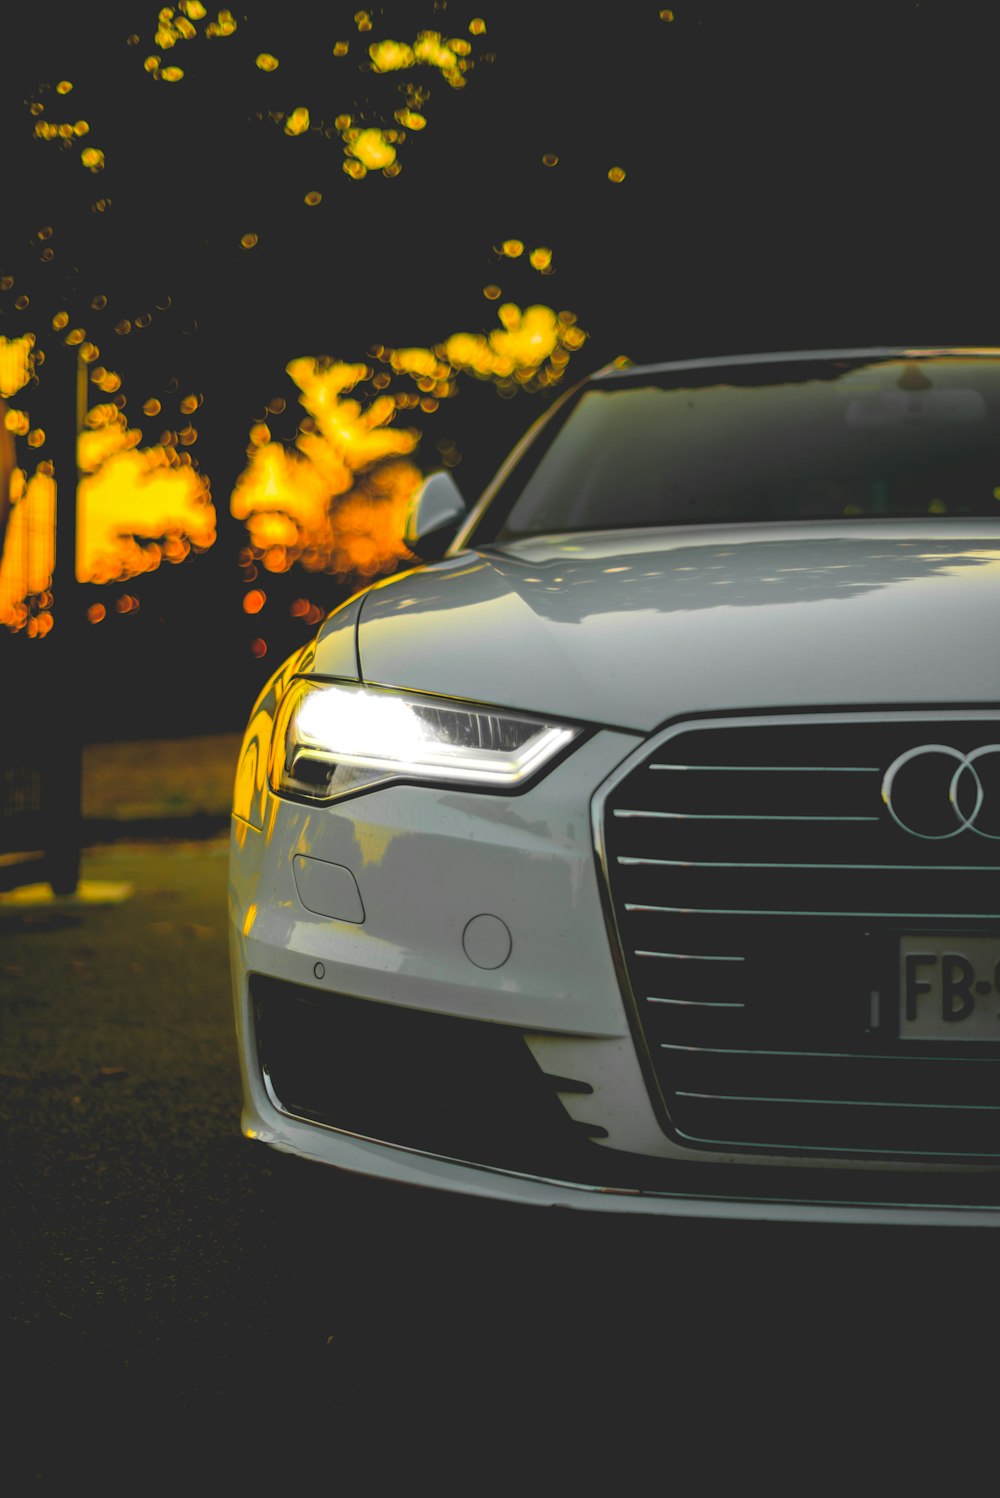 Audi A6 Pictures | Download Free Images on Unsplash